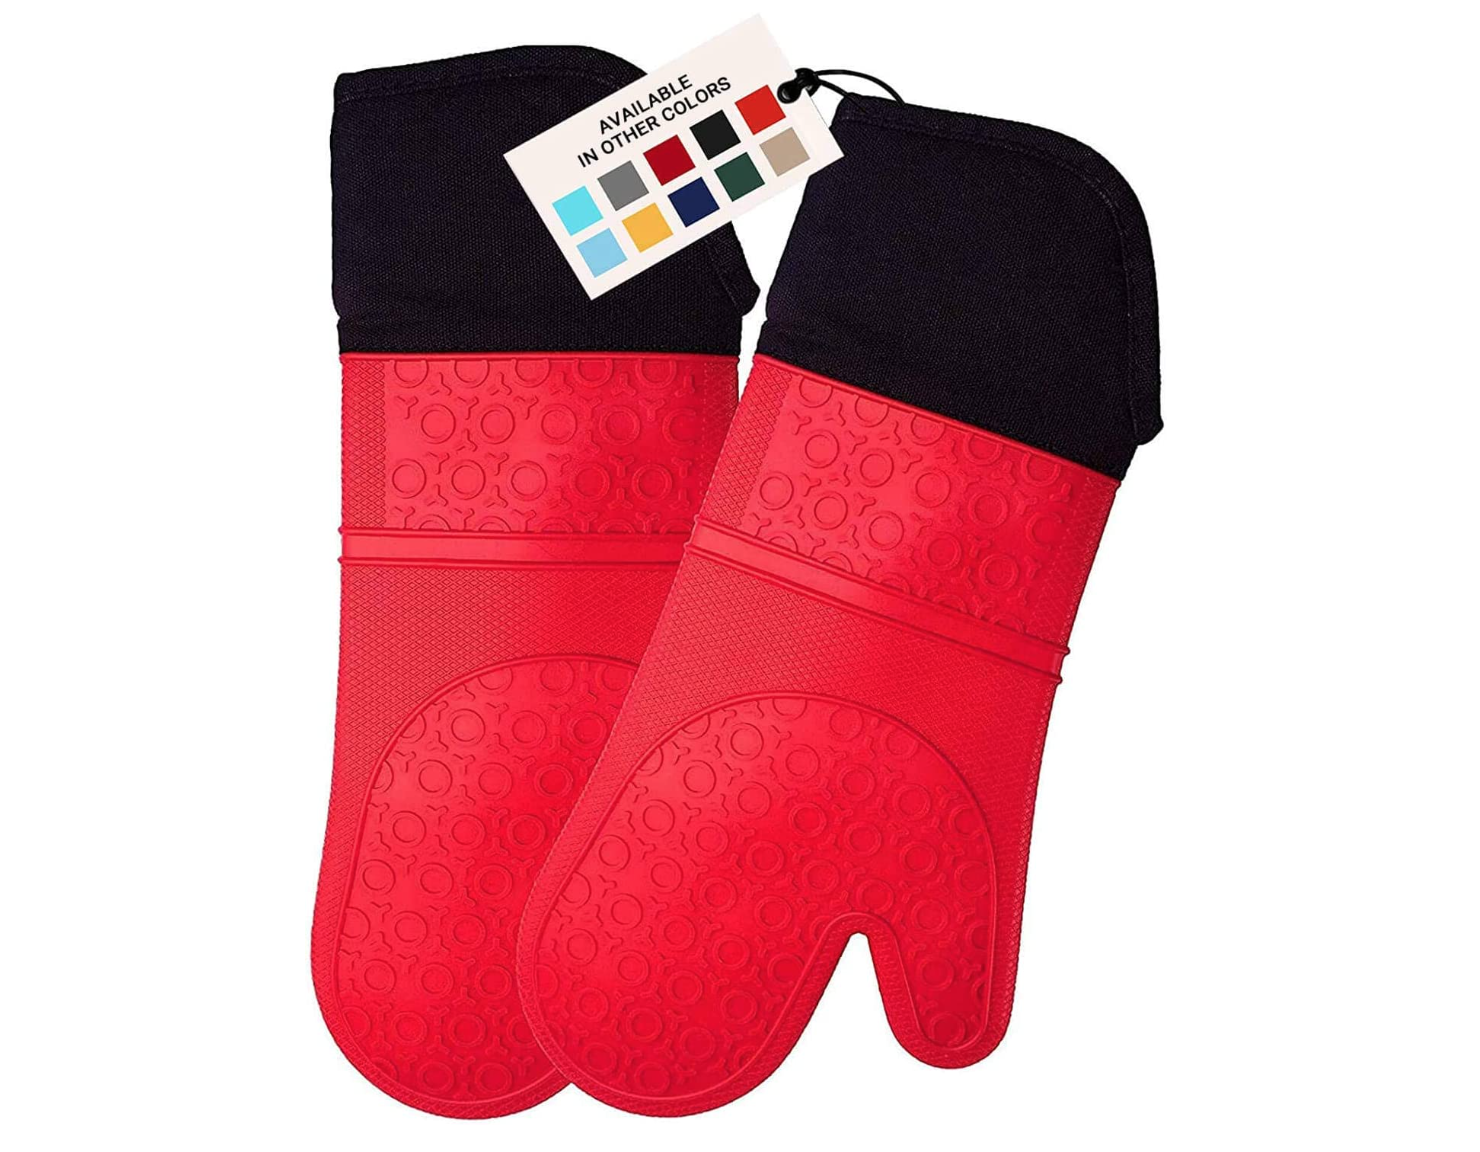  Big Red House Heat-Resistant Oven Mitts - Set of 2 Silicone Kitchen  Oven Mitt Gloves, Red: Home & Kitchen